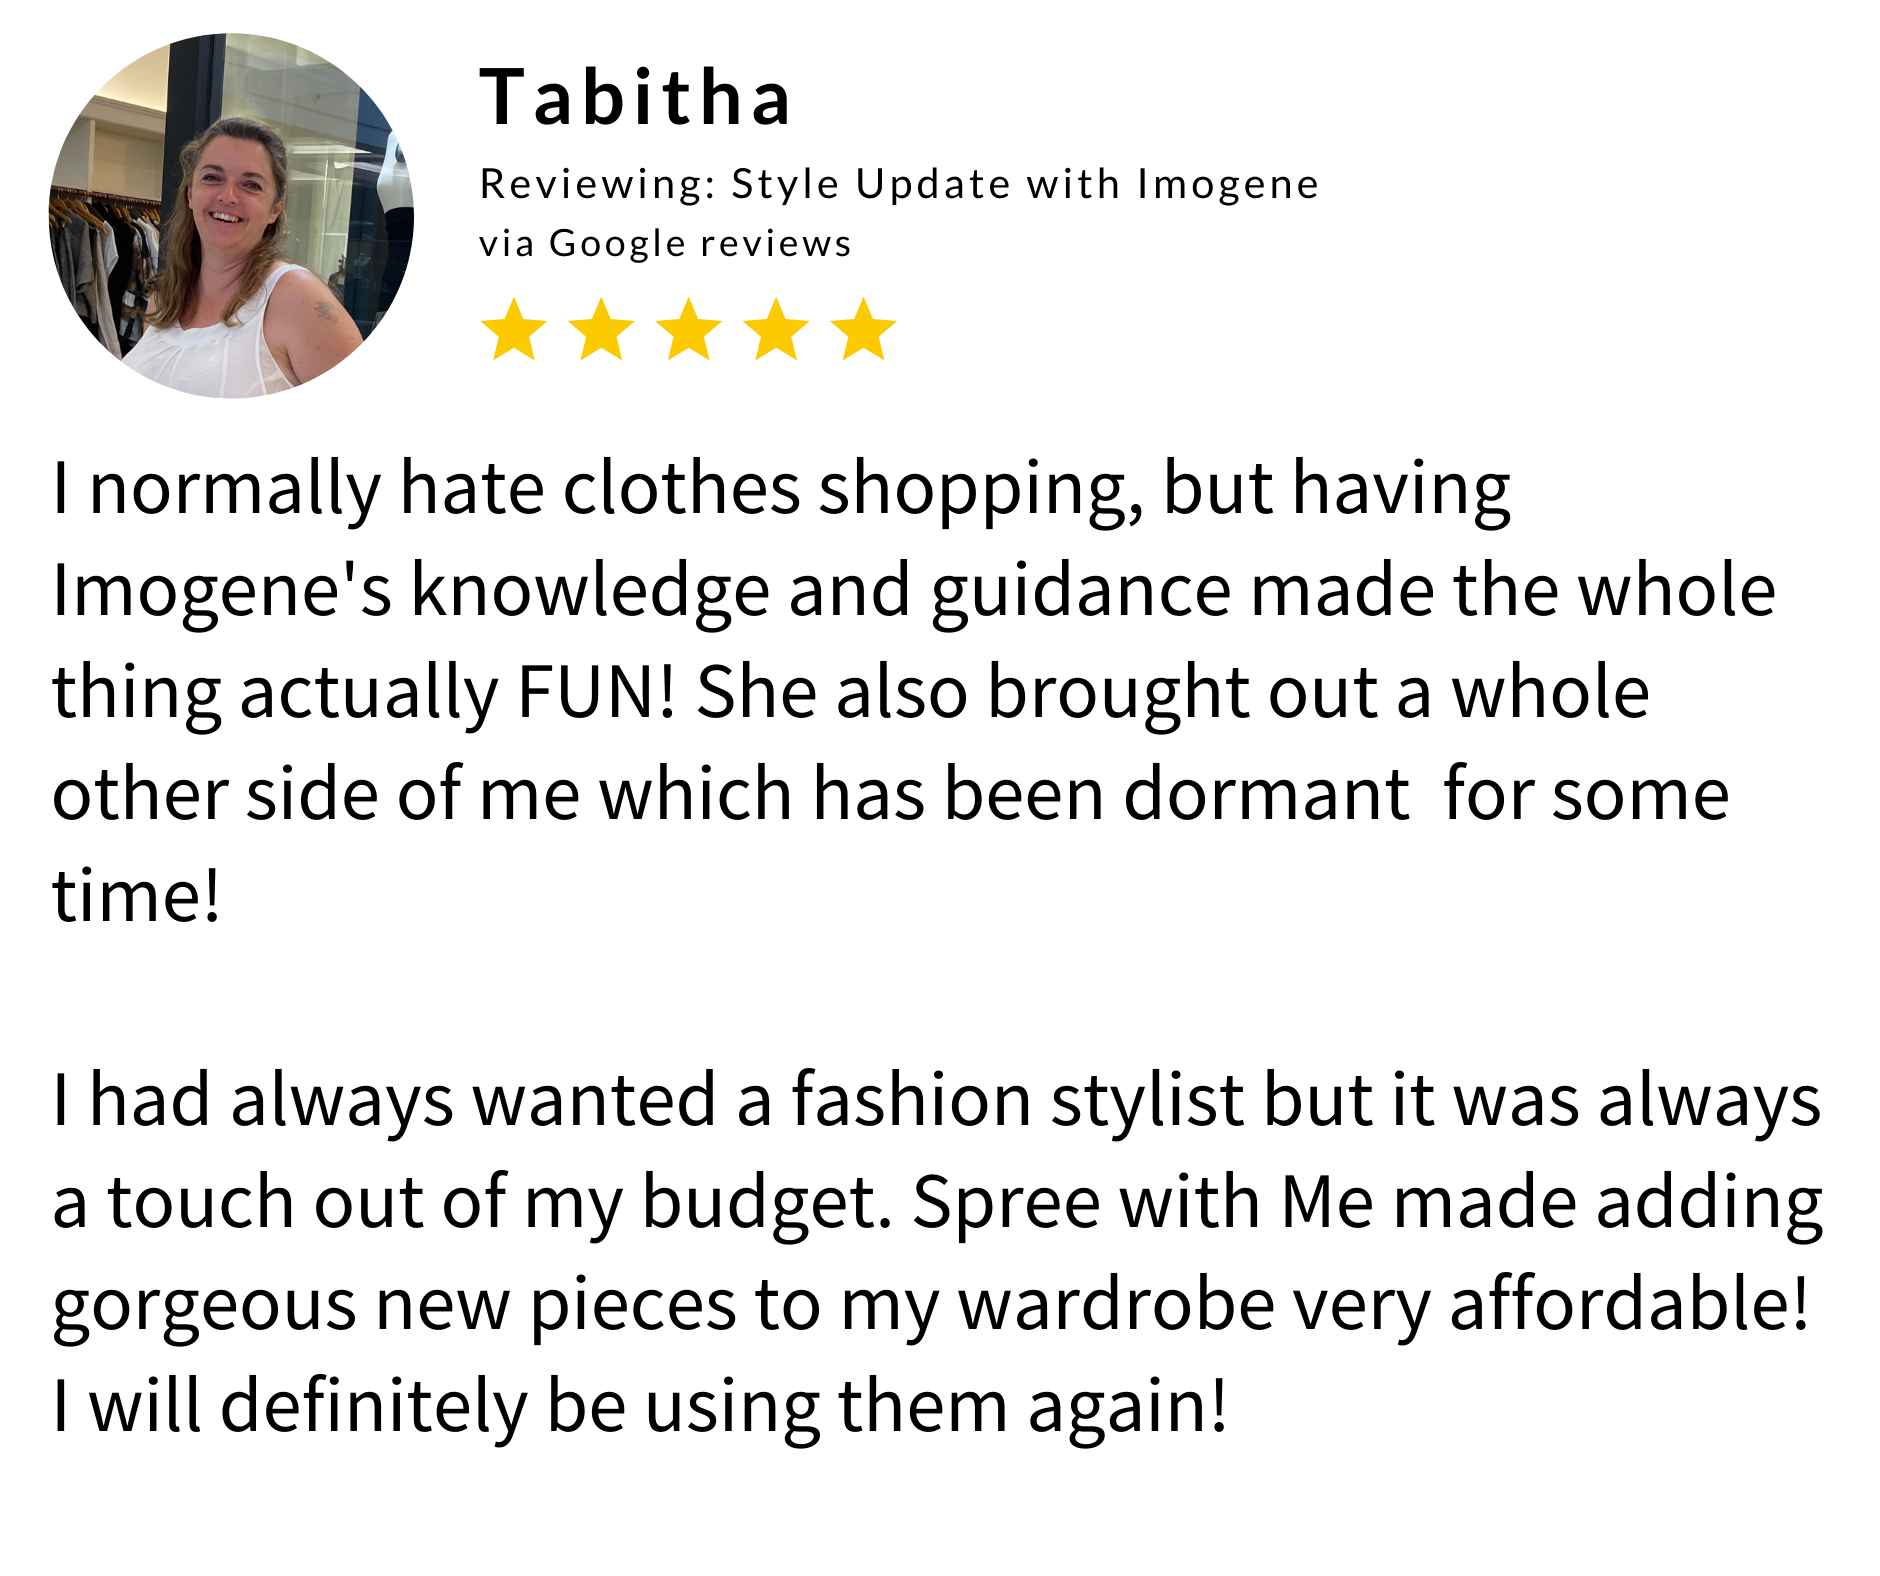 Tabitha_Brisbane Spree with Me Personal Stylist Review.png